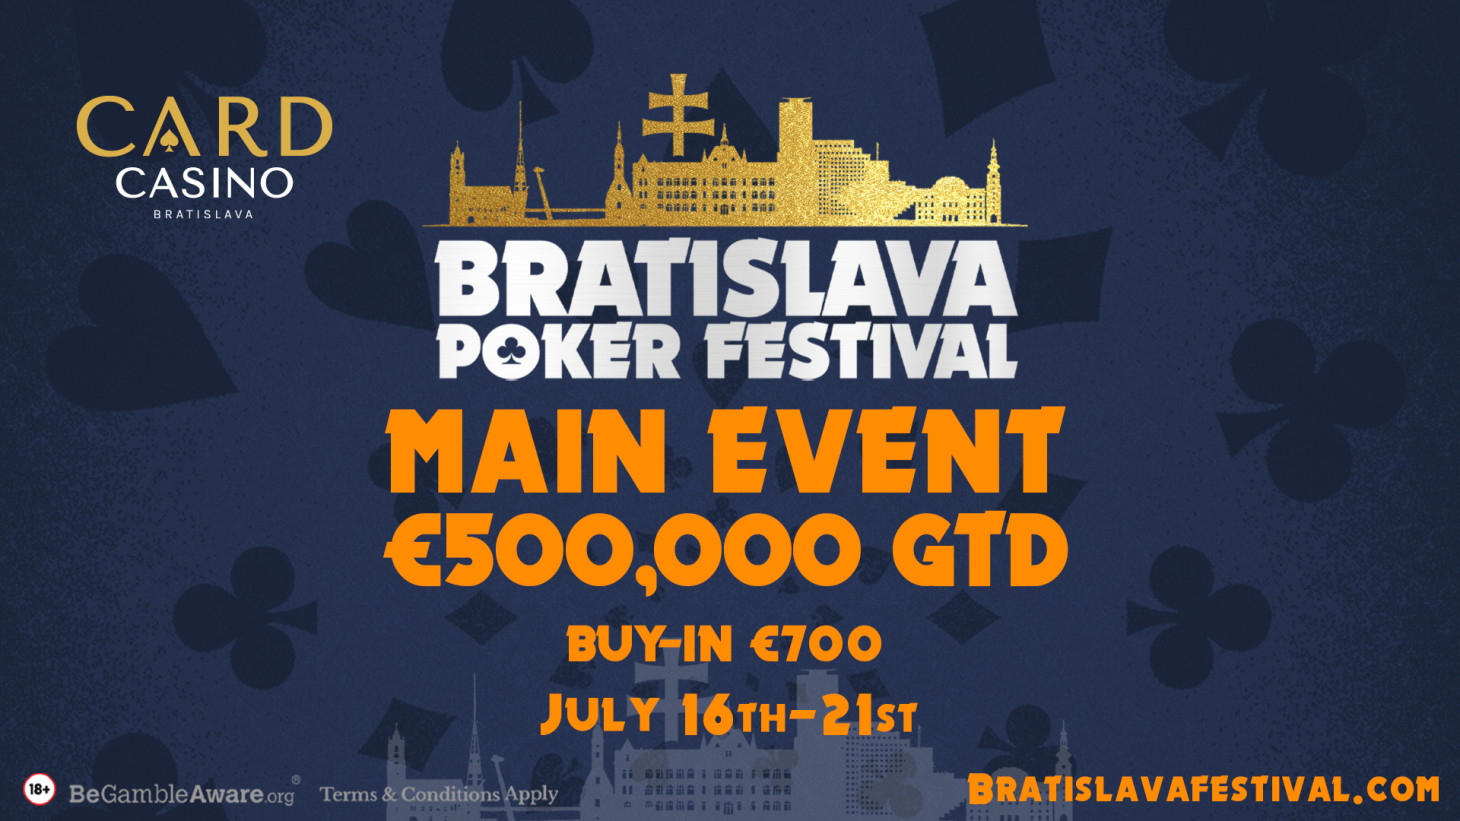 The Bratislava Poker Festival with €500,000 GTD Main Event will be played in July!